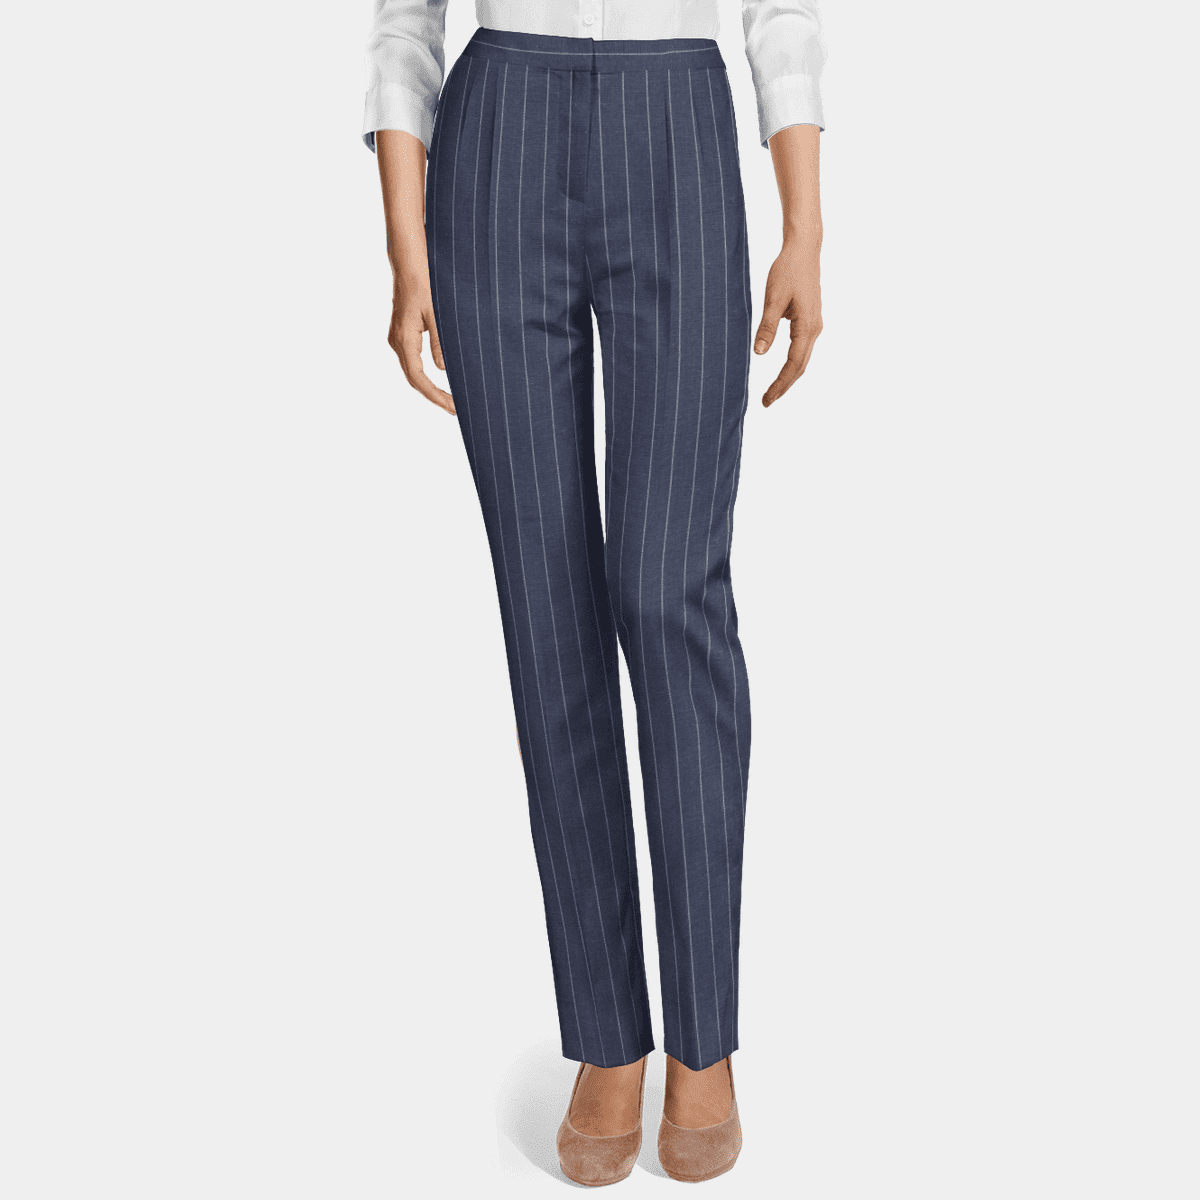 Blue striped Linen high waisted pleated Women Trousers $109 | Sumissura